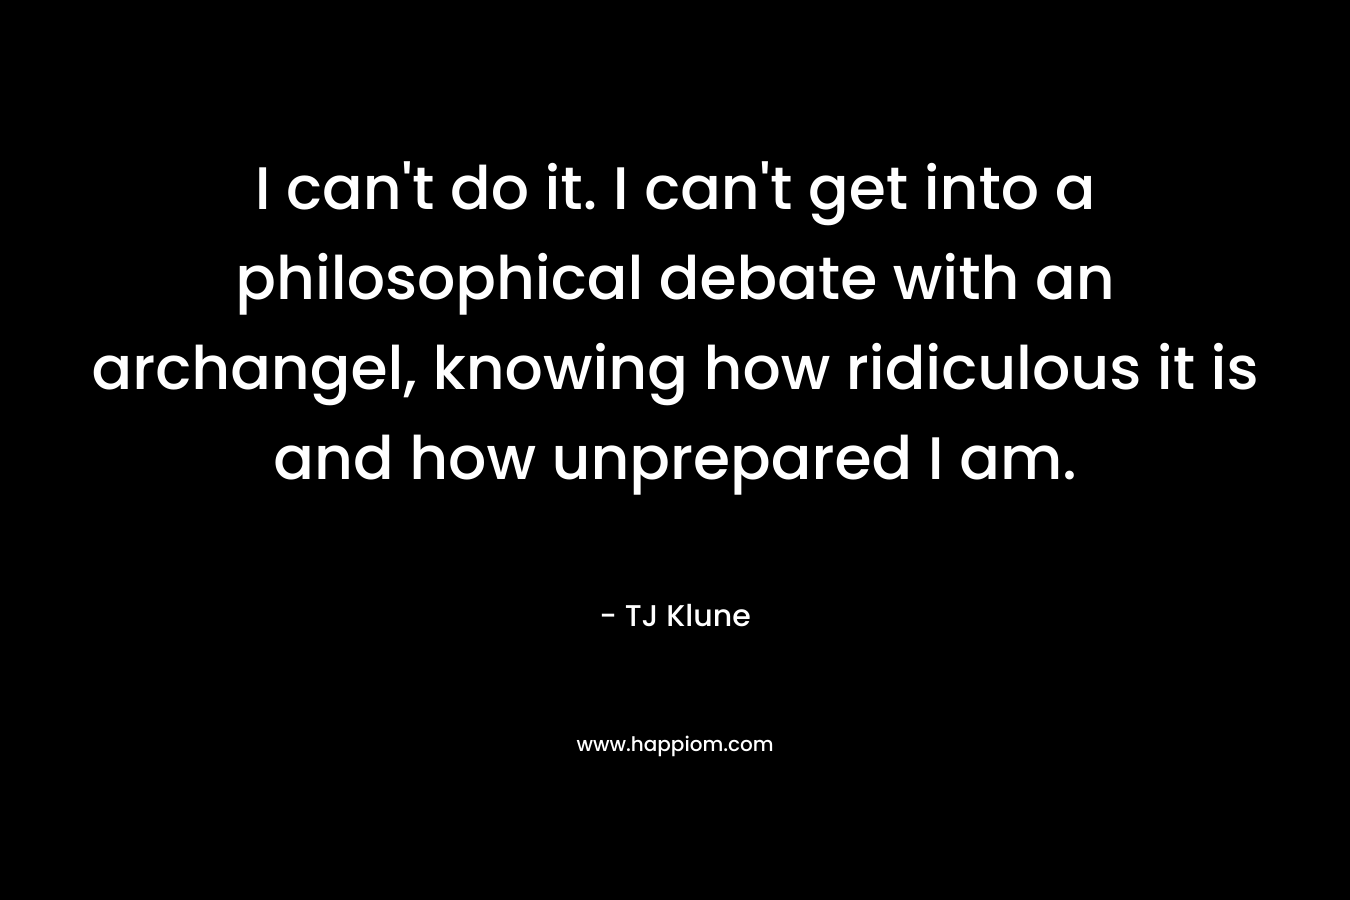 I can’t do it. I can’t get into a philosophical debate with an archangel, knowing how ridiculous it is and how unprepared I am. – TJ Klune